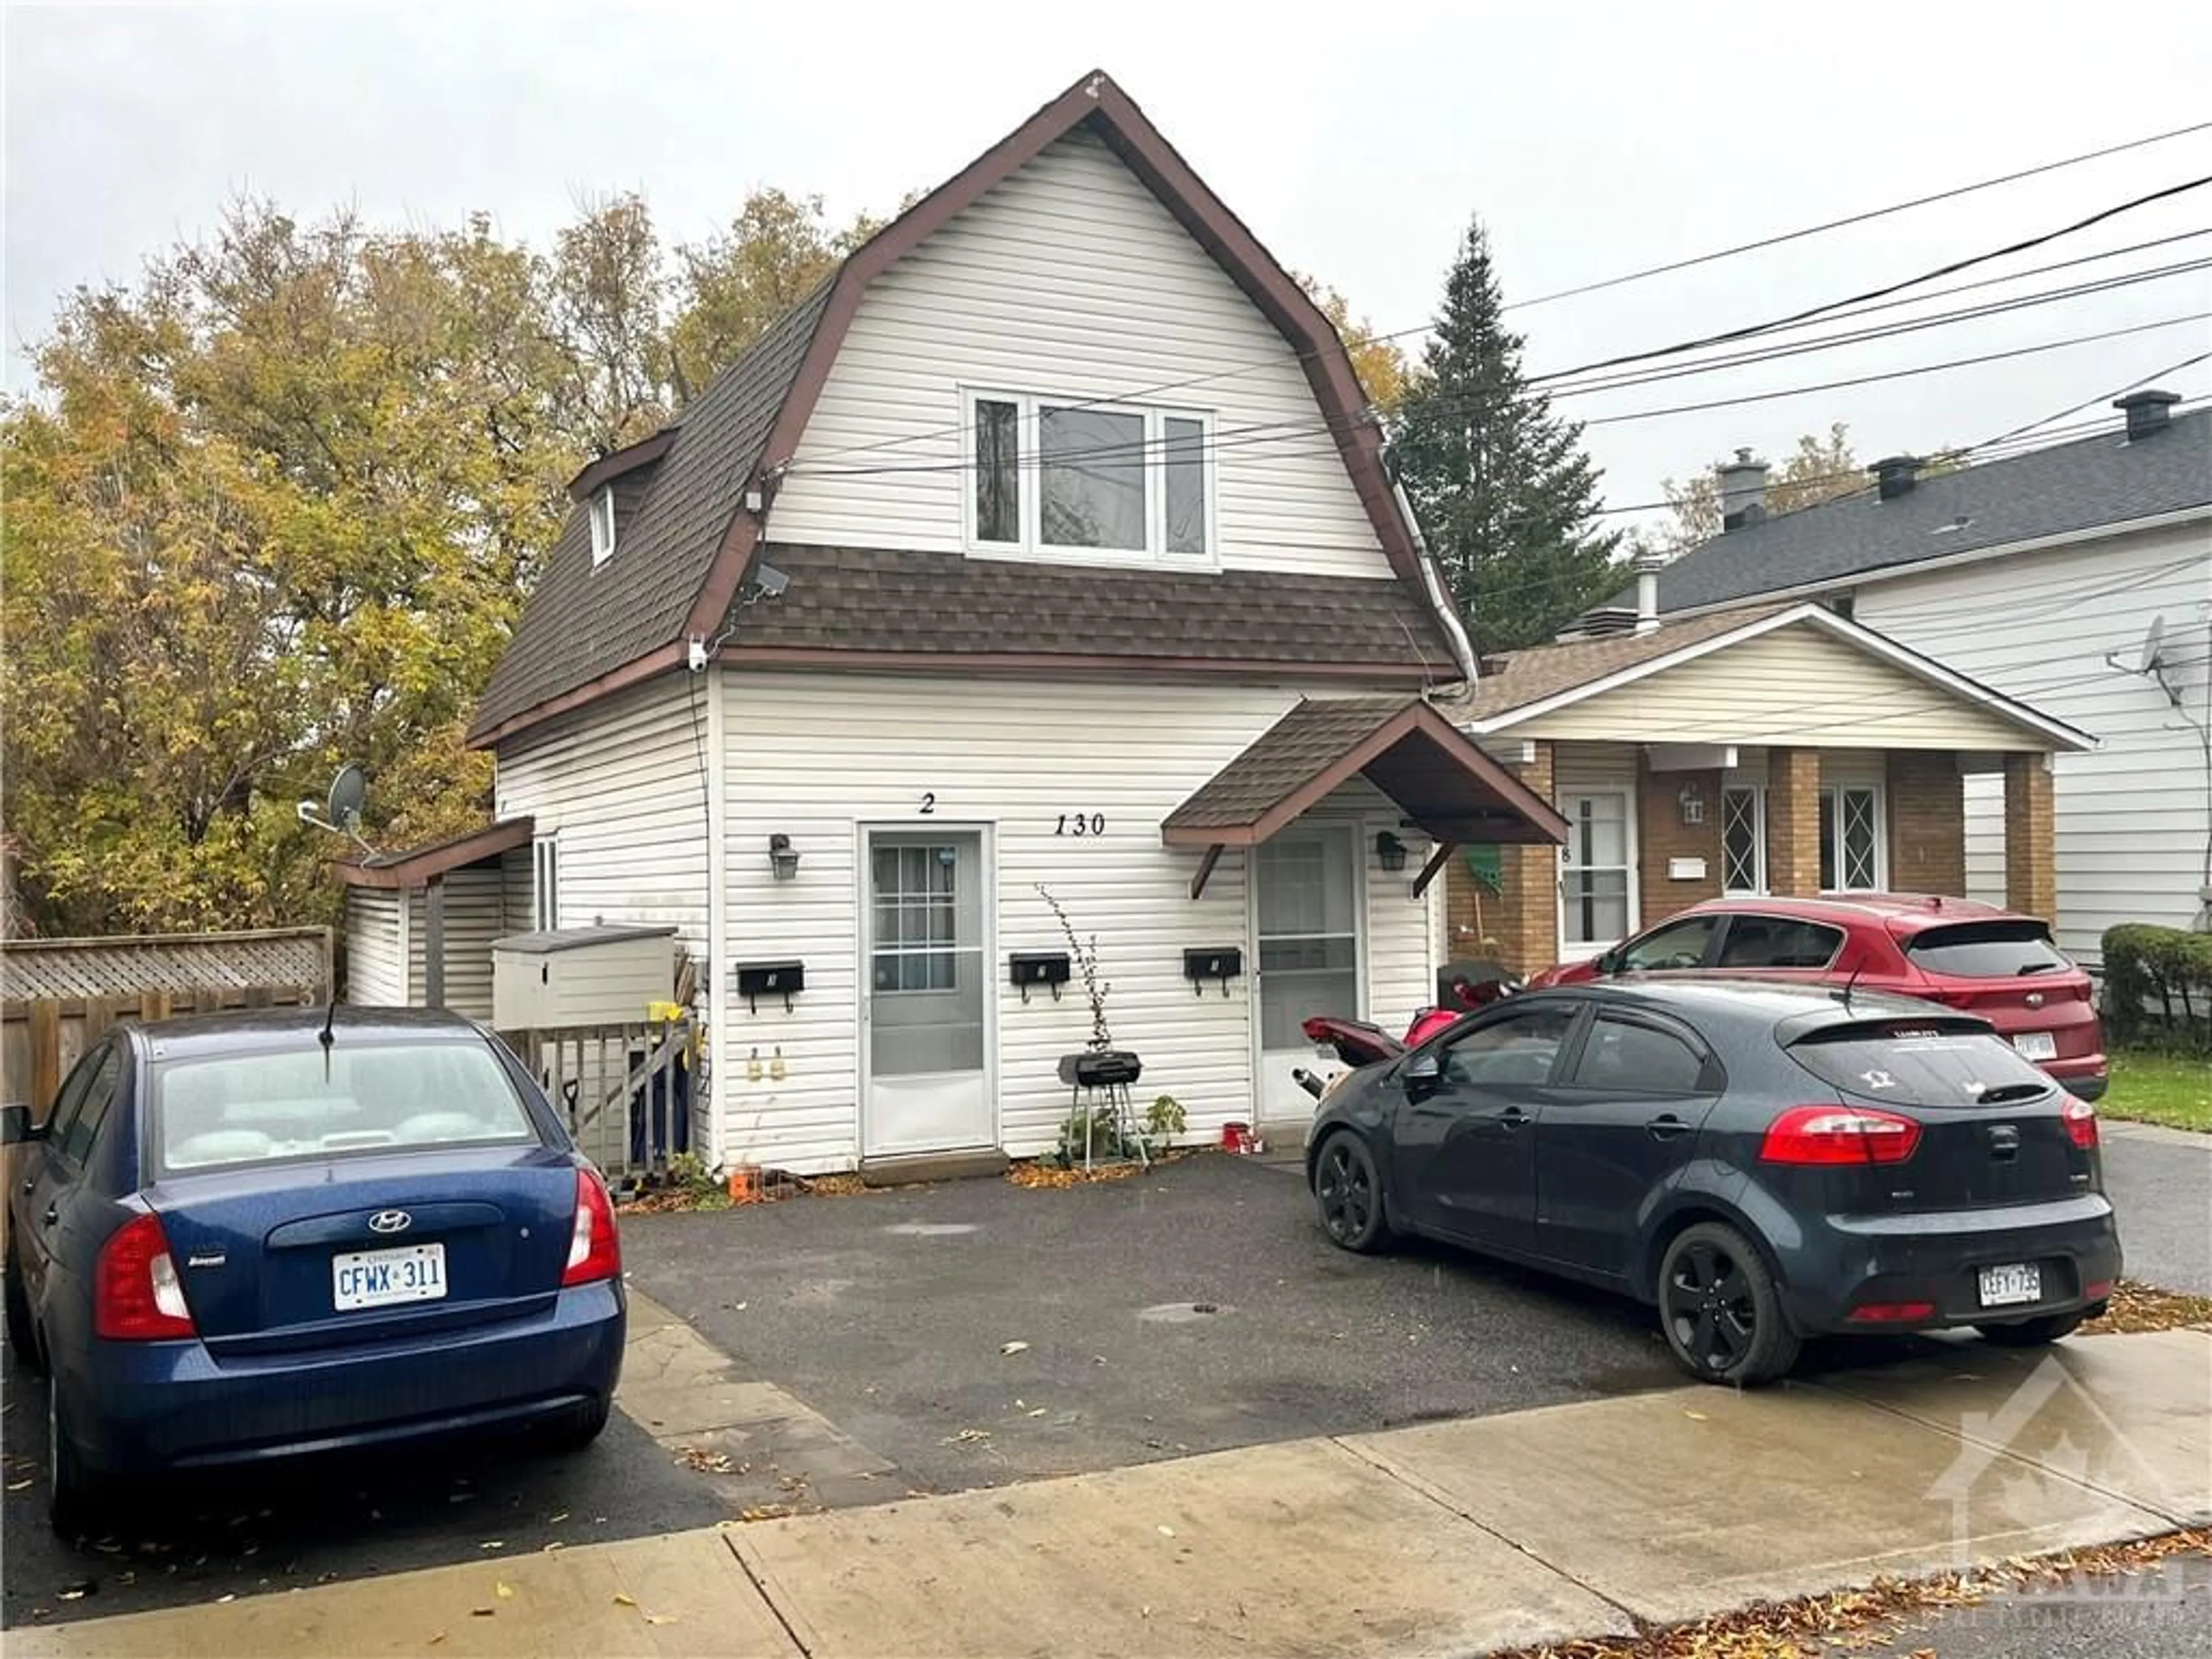 Outside view for 130 SHERBROOKE Ave, Ottawa Ontario K1Y 1R9